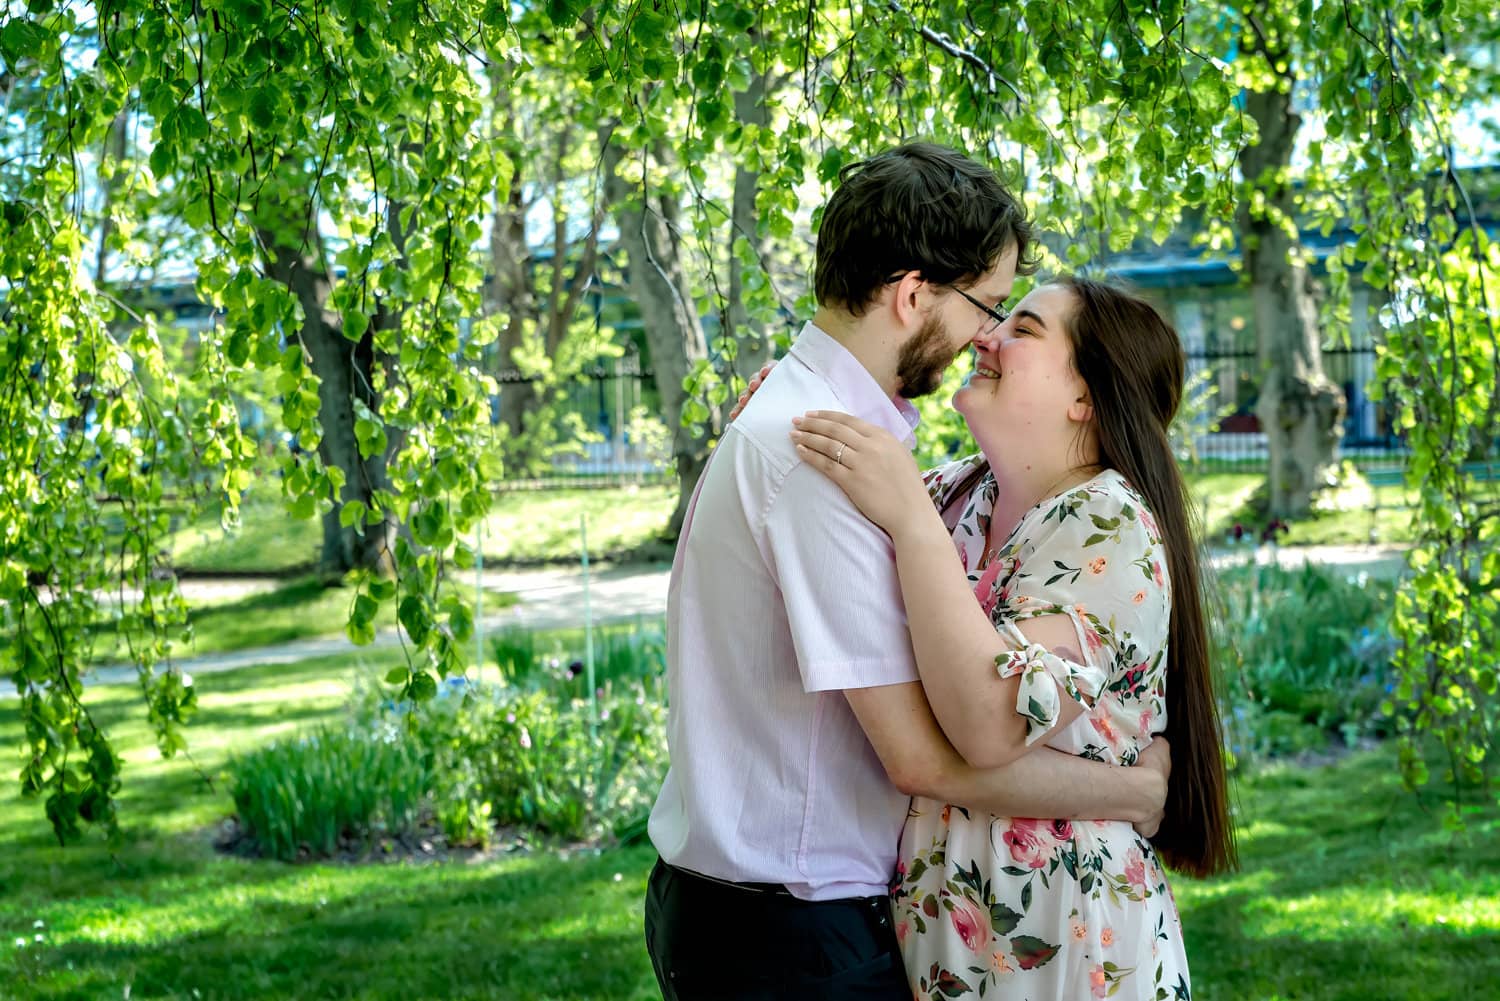 A Sweet Surprise Marriage Proposal and Engagement Photos, A Love Story…with Andrea and Ben